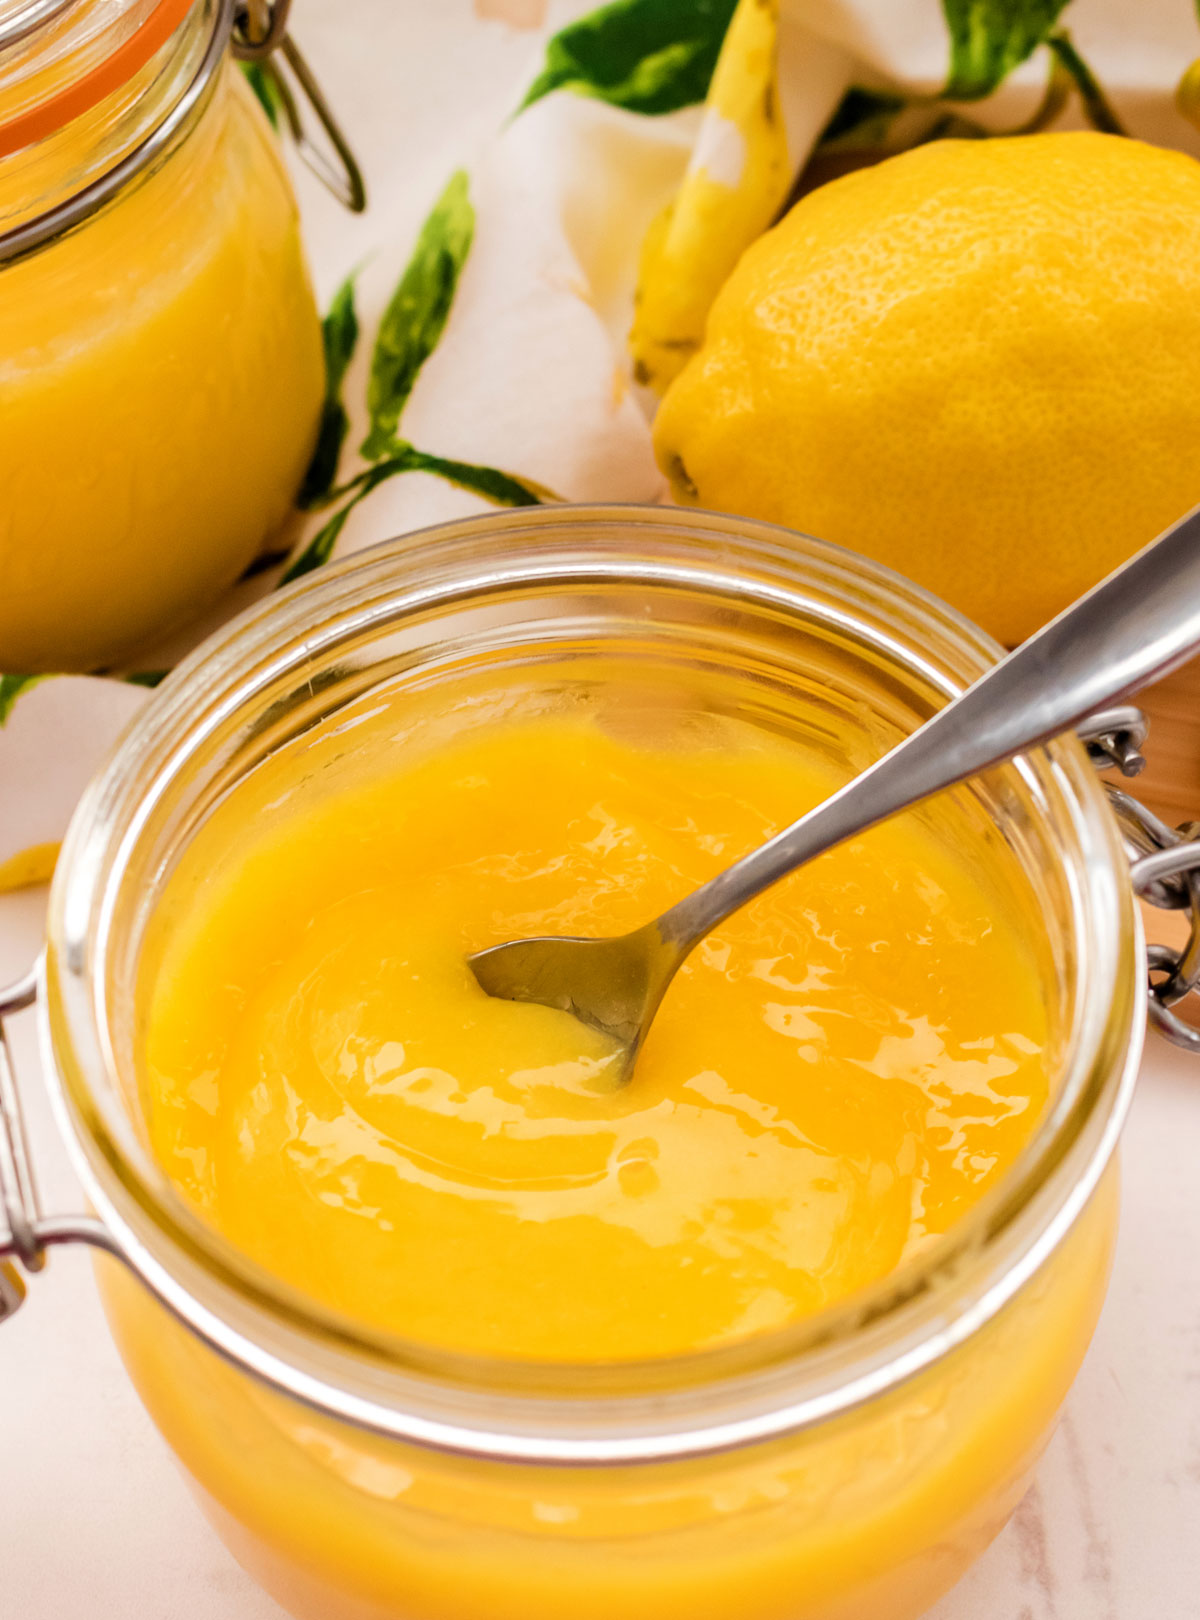 A glass jar filled with Homemade Lemon Curd and a sliver spoon surrounded by fresh lemons and a kitchen towel.